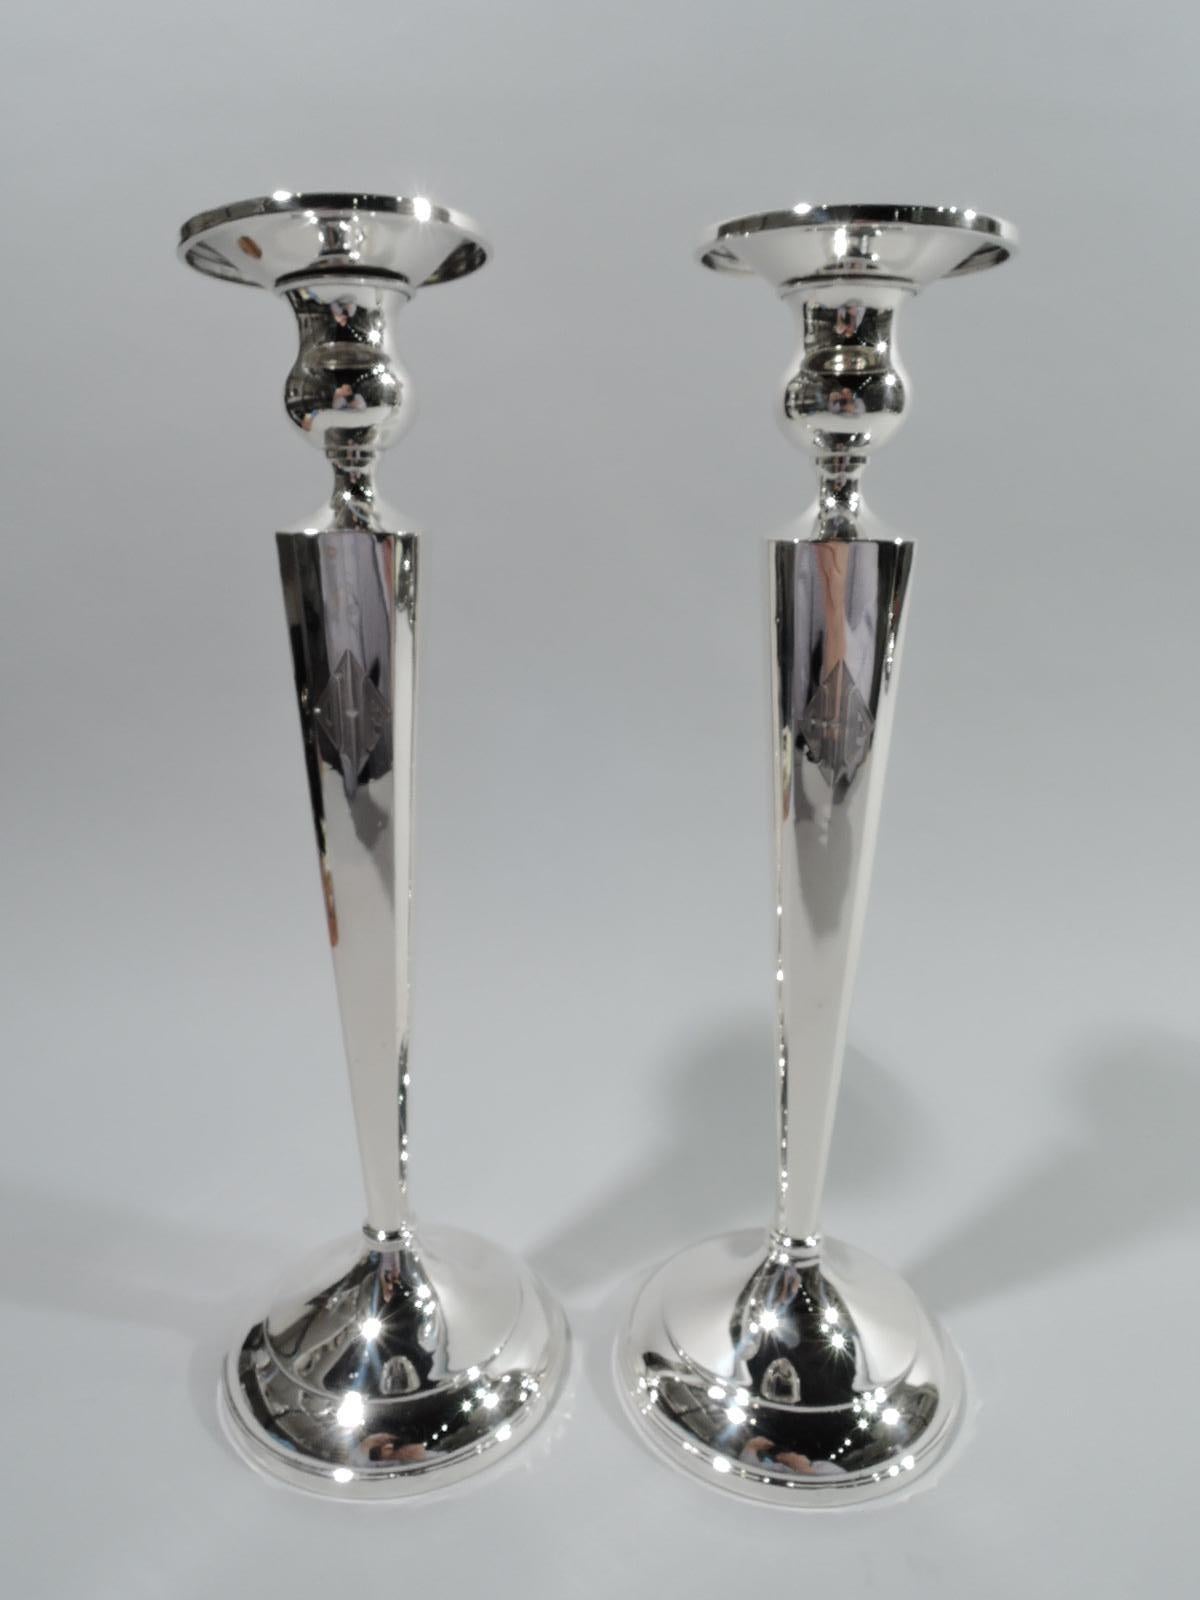 Pair of American Modern classical sterling silver candlesticks, ca 1940. Each: Tapering and chamfered pillar on domed foot. Bellied socket and detachable bobeche. Three-letter monogram. Marked “Sterling”. Weighted.